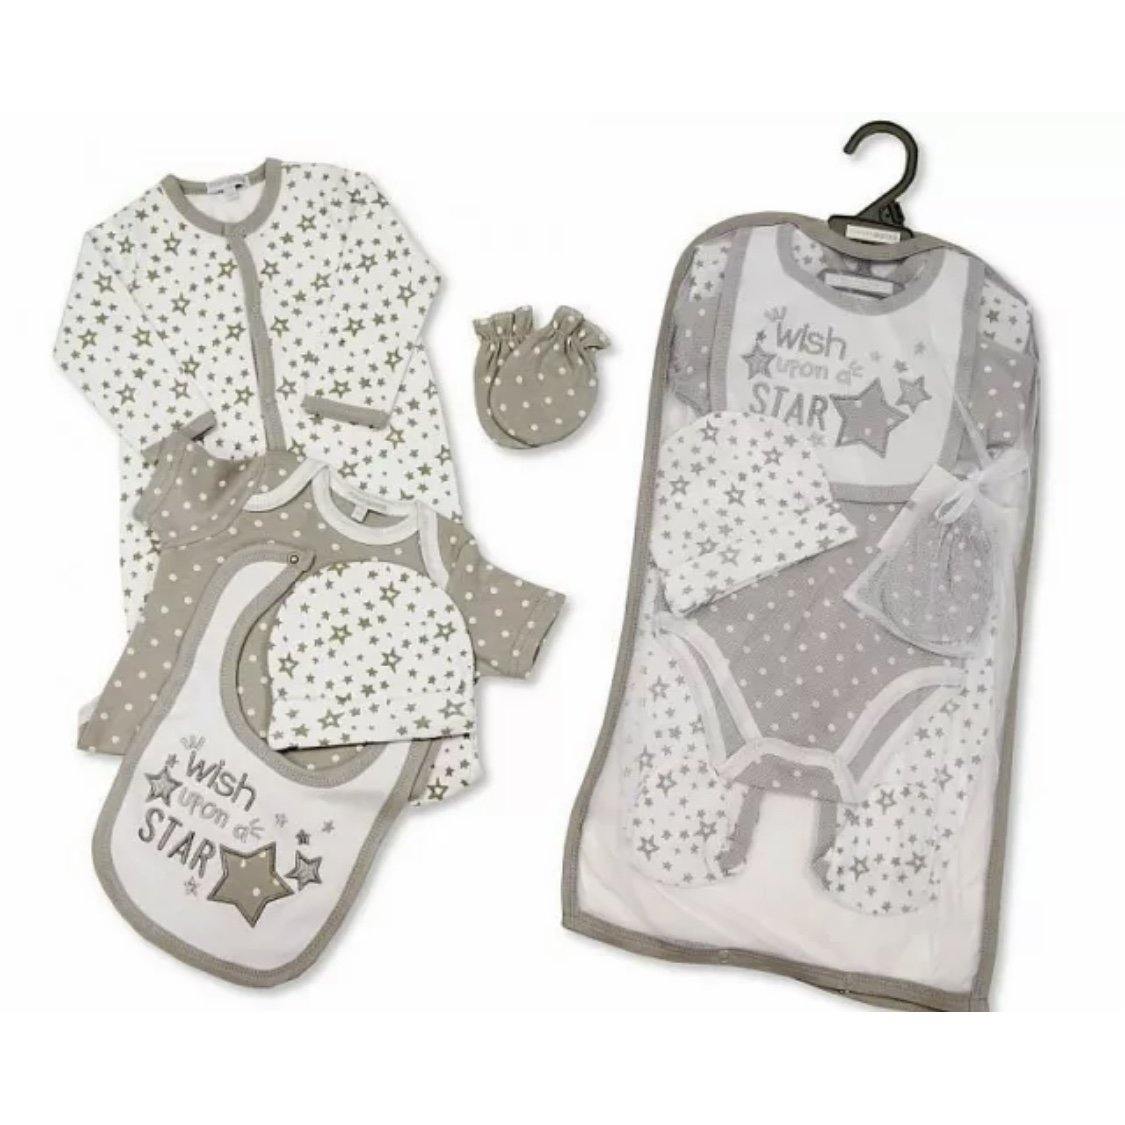 Baby 5 Piece "Wish Upon A Star" Gift Set | Oscar & Me | Baby & Children’s Clothing & Accessories